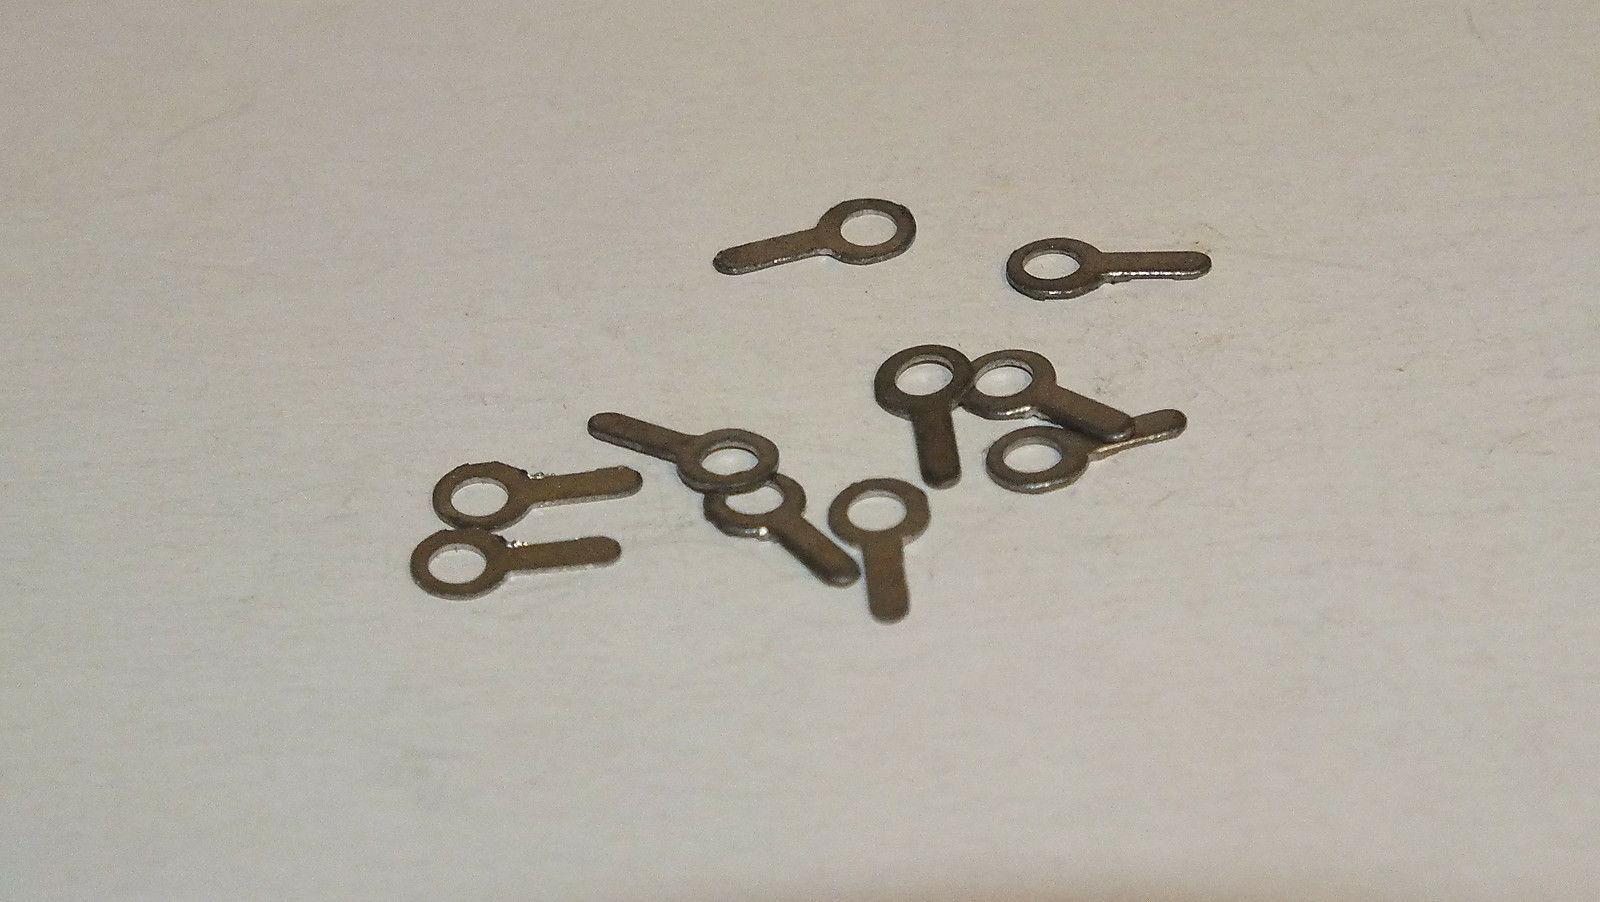 MS104 # 10BA universal tag washer x10 not hornby size  you need S5228       R6A